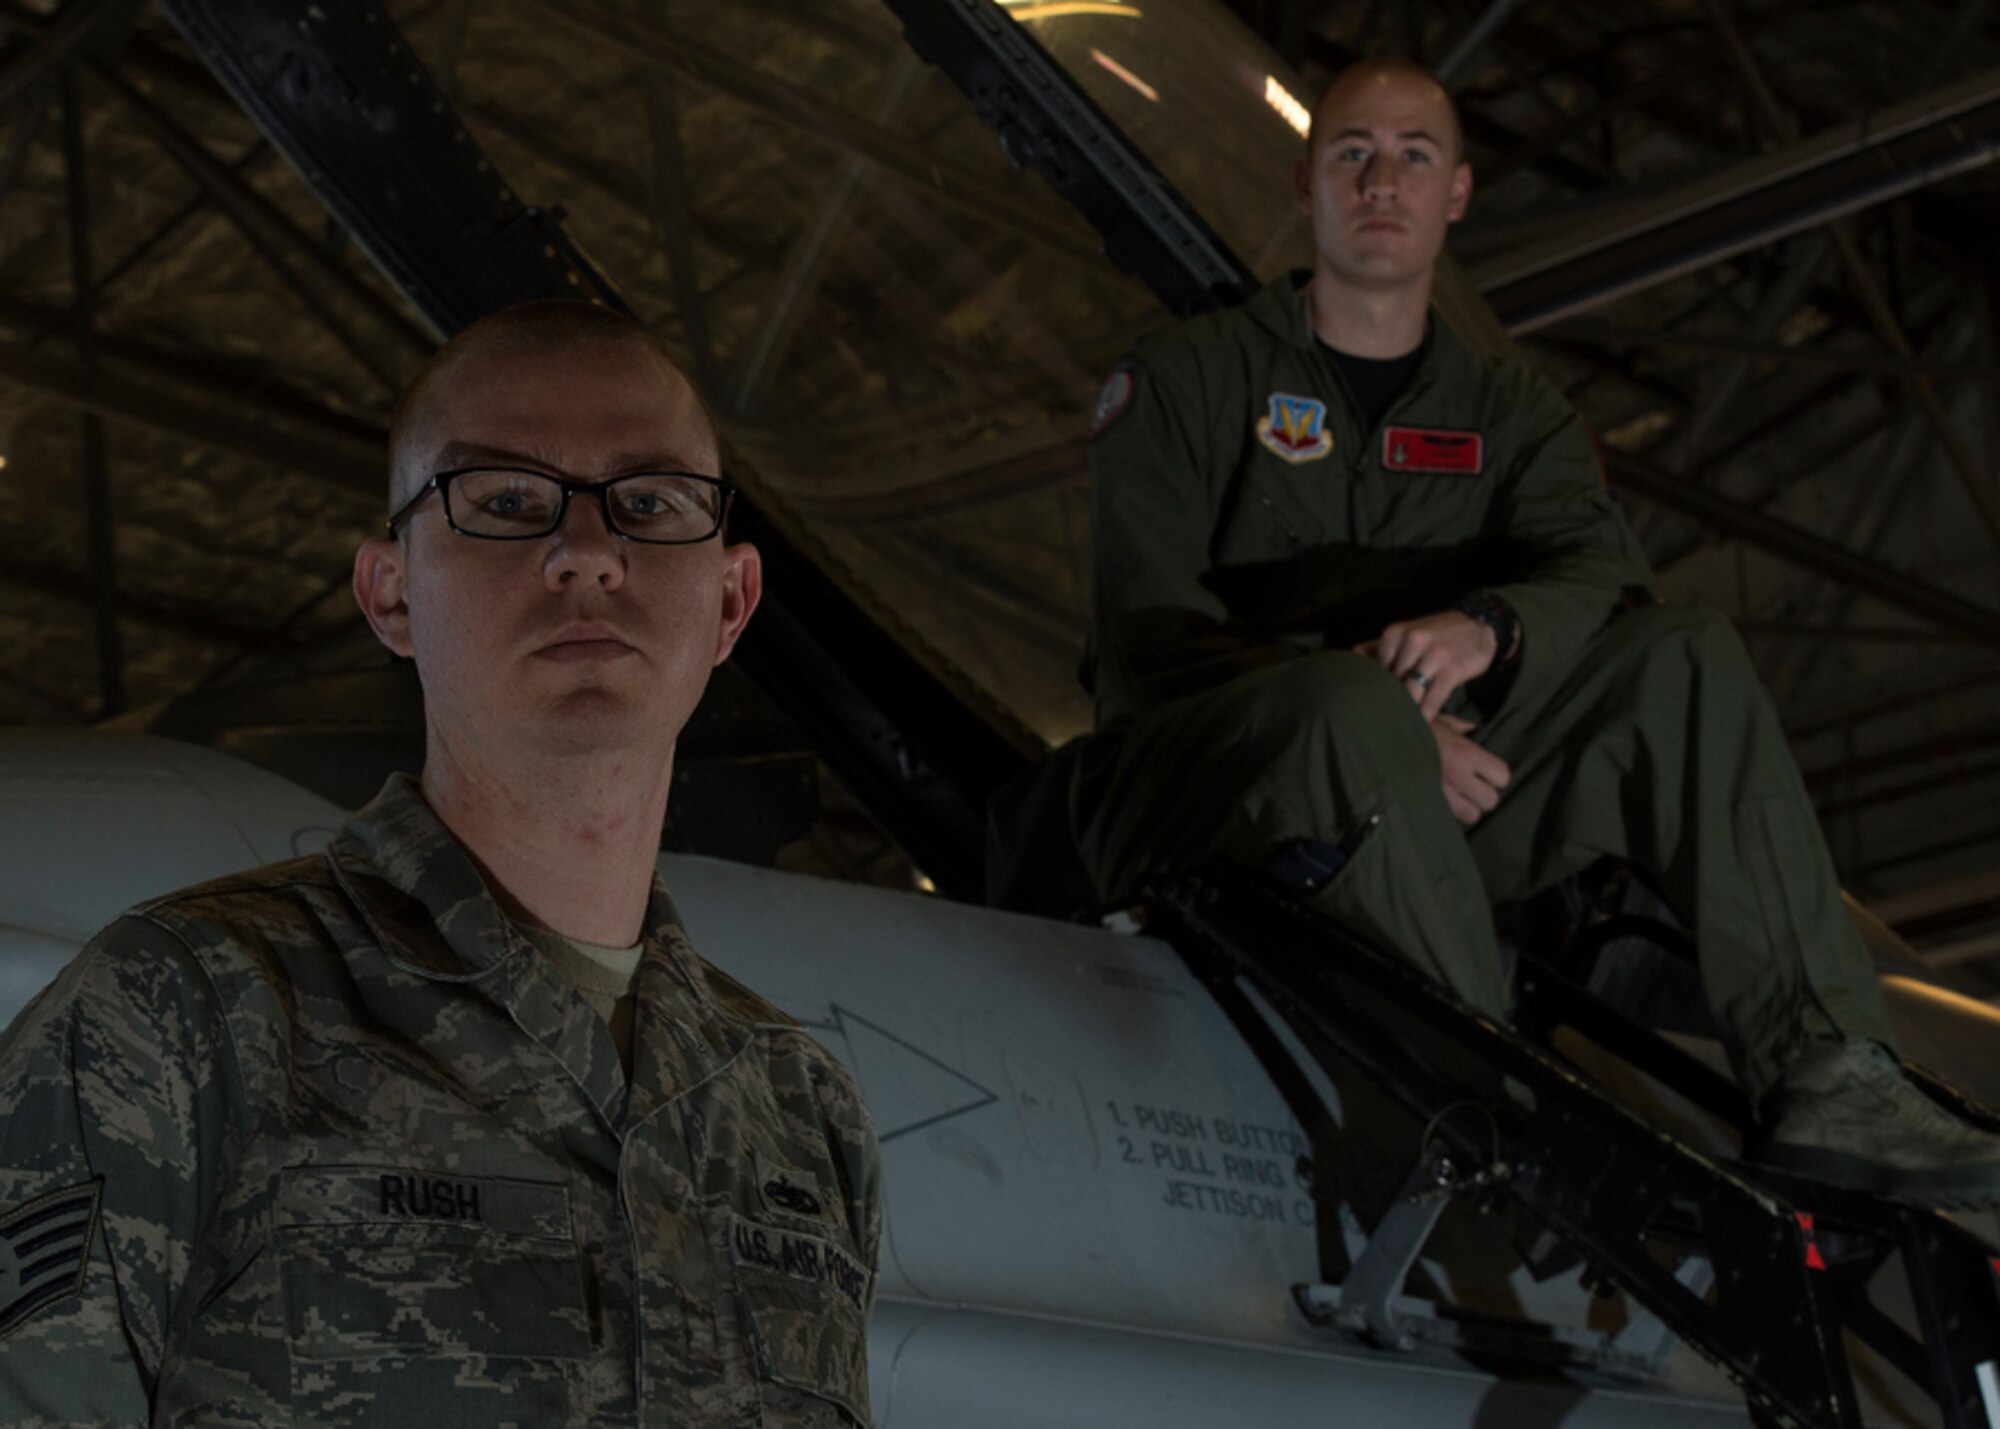 Brothers 1st Lt. Sean Rush, a pilot in the 421st Fighter Squadron, and Staff Sgt. Brandon Rush of the 388th Aircraft Maintenance Squadron are both assigned to the 388th Fighter Wing at Hill Air Force Base, Utah. Sean flies and Brandon maintains - they directly complement each other's contributions to the mission.